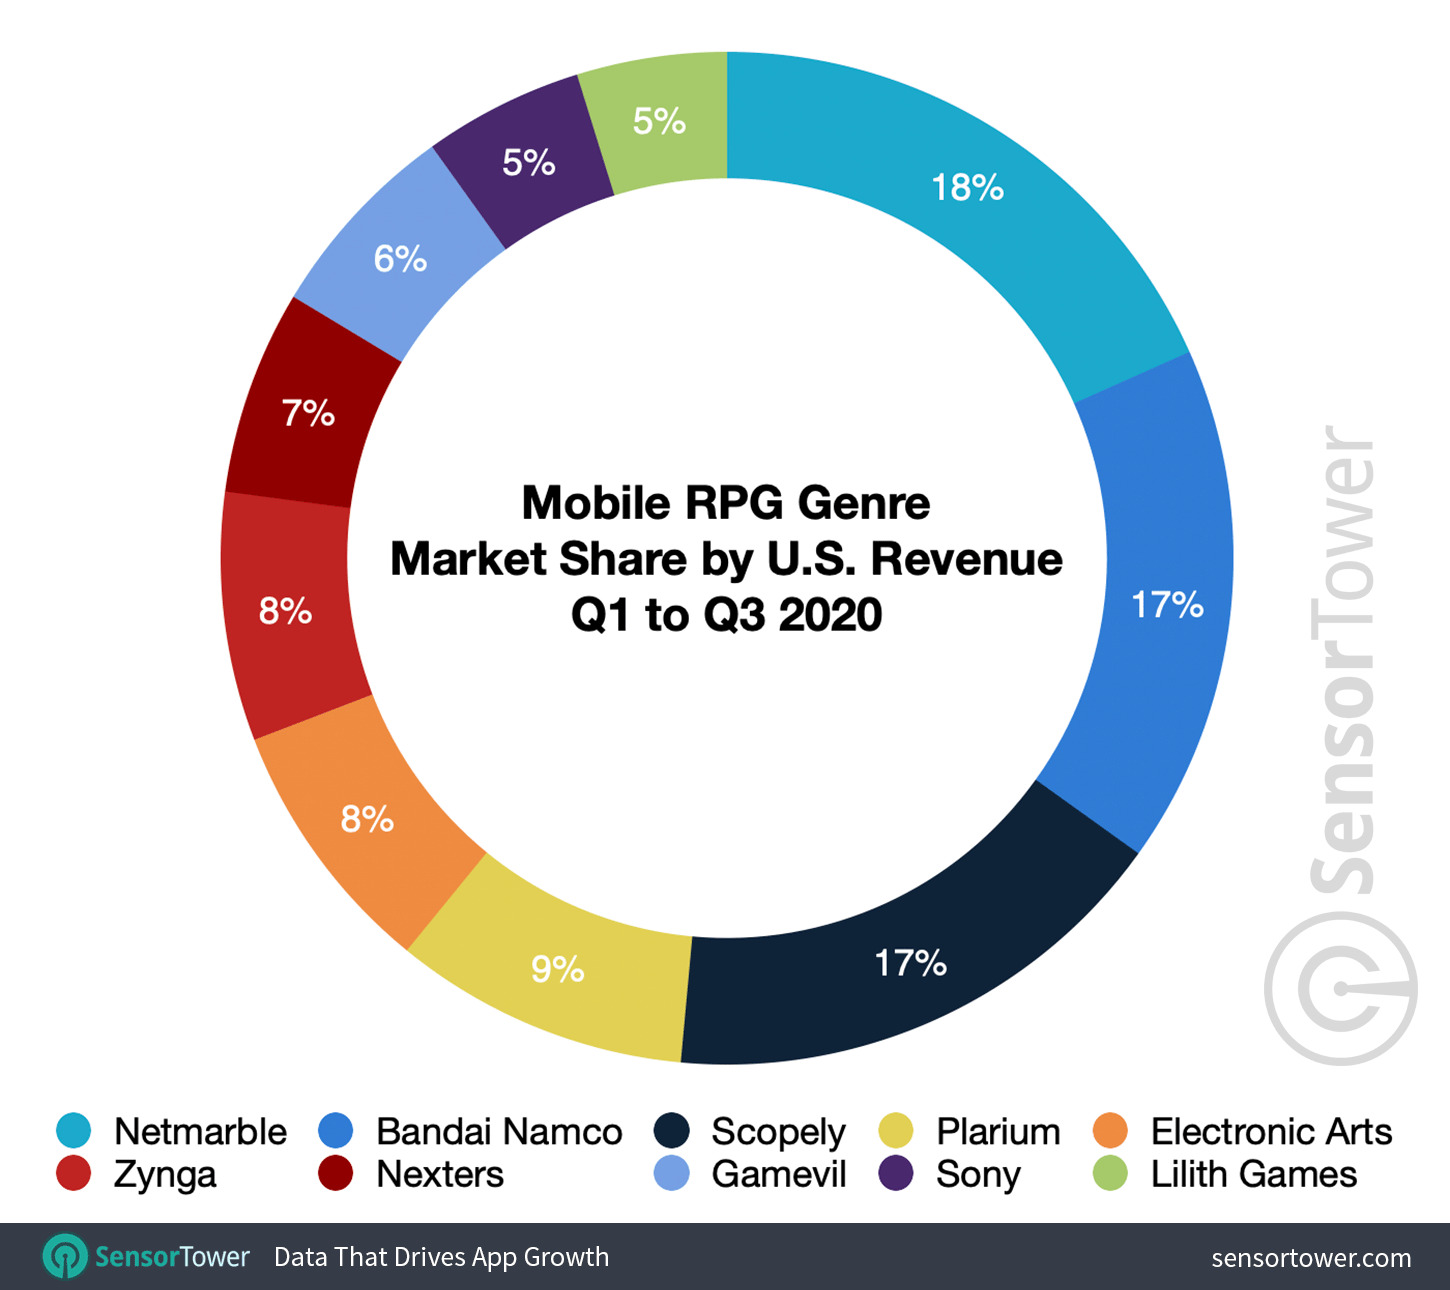 Mobile RPG Genre Market Share by U.S. Revenue for Q1 to Q3 2020